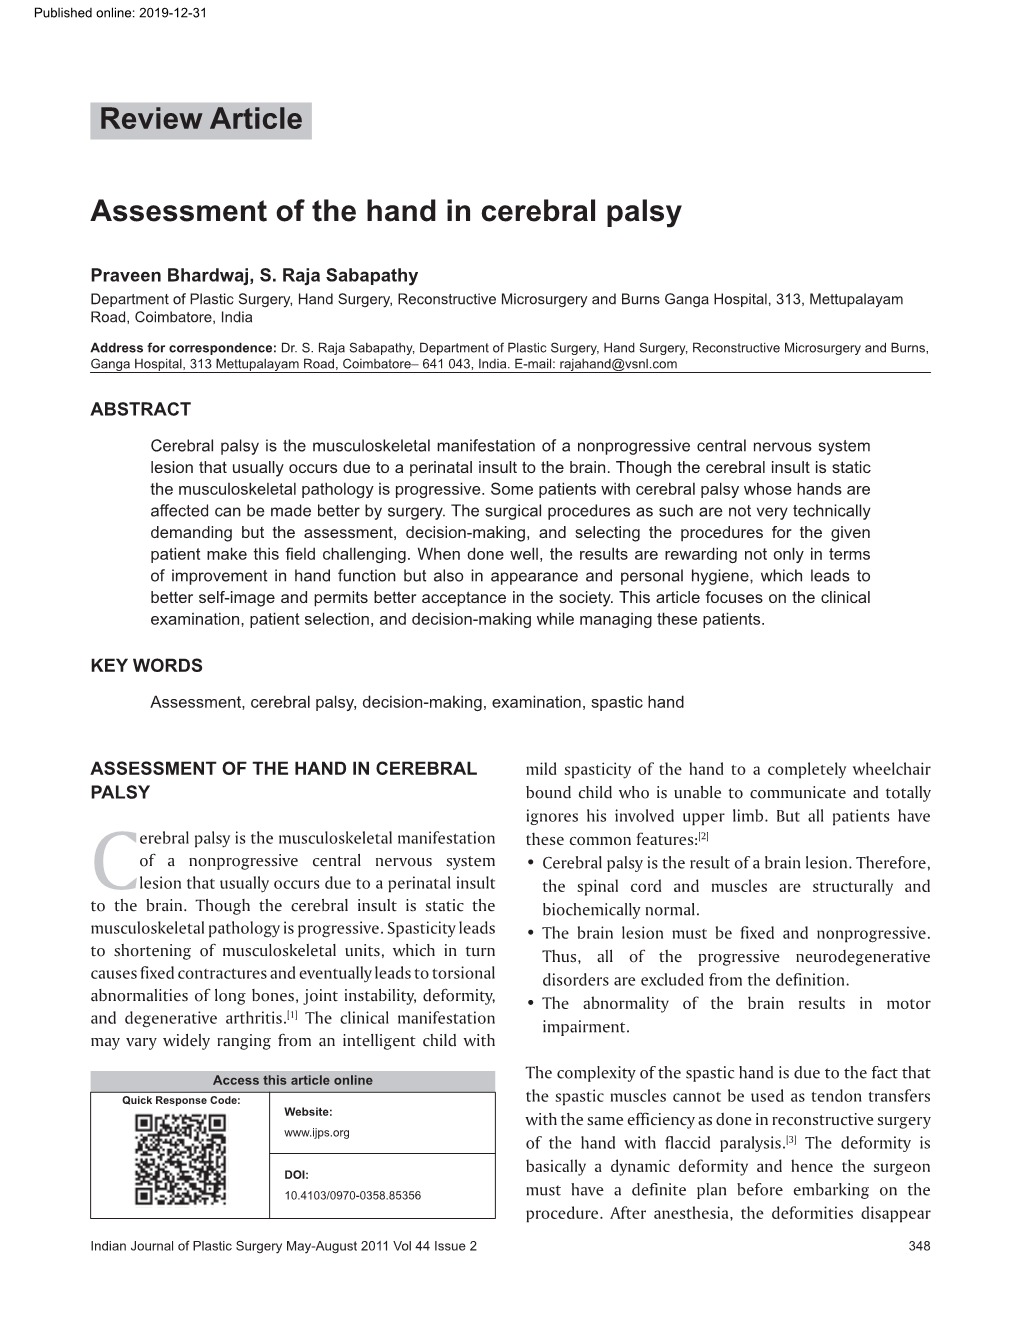 Assessment of the Hand in Cerebral Palsy